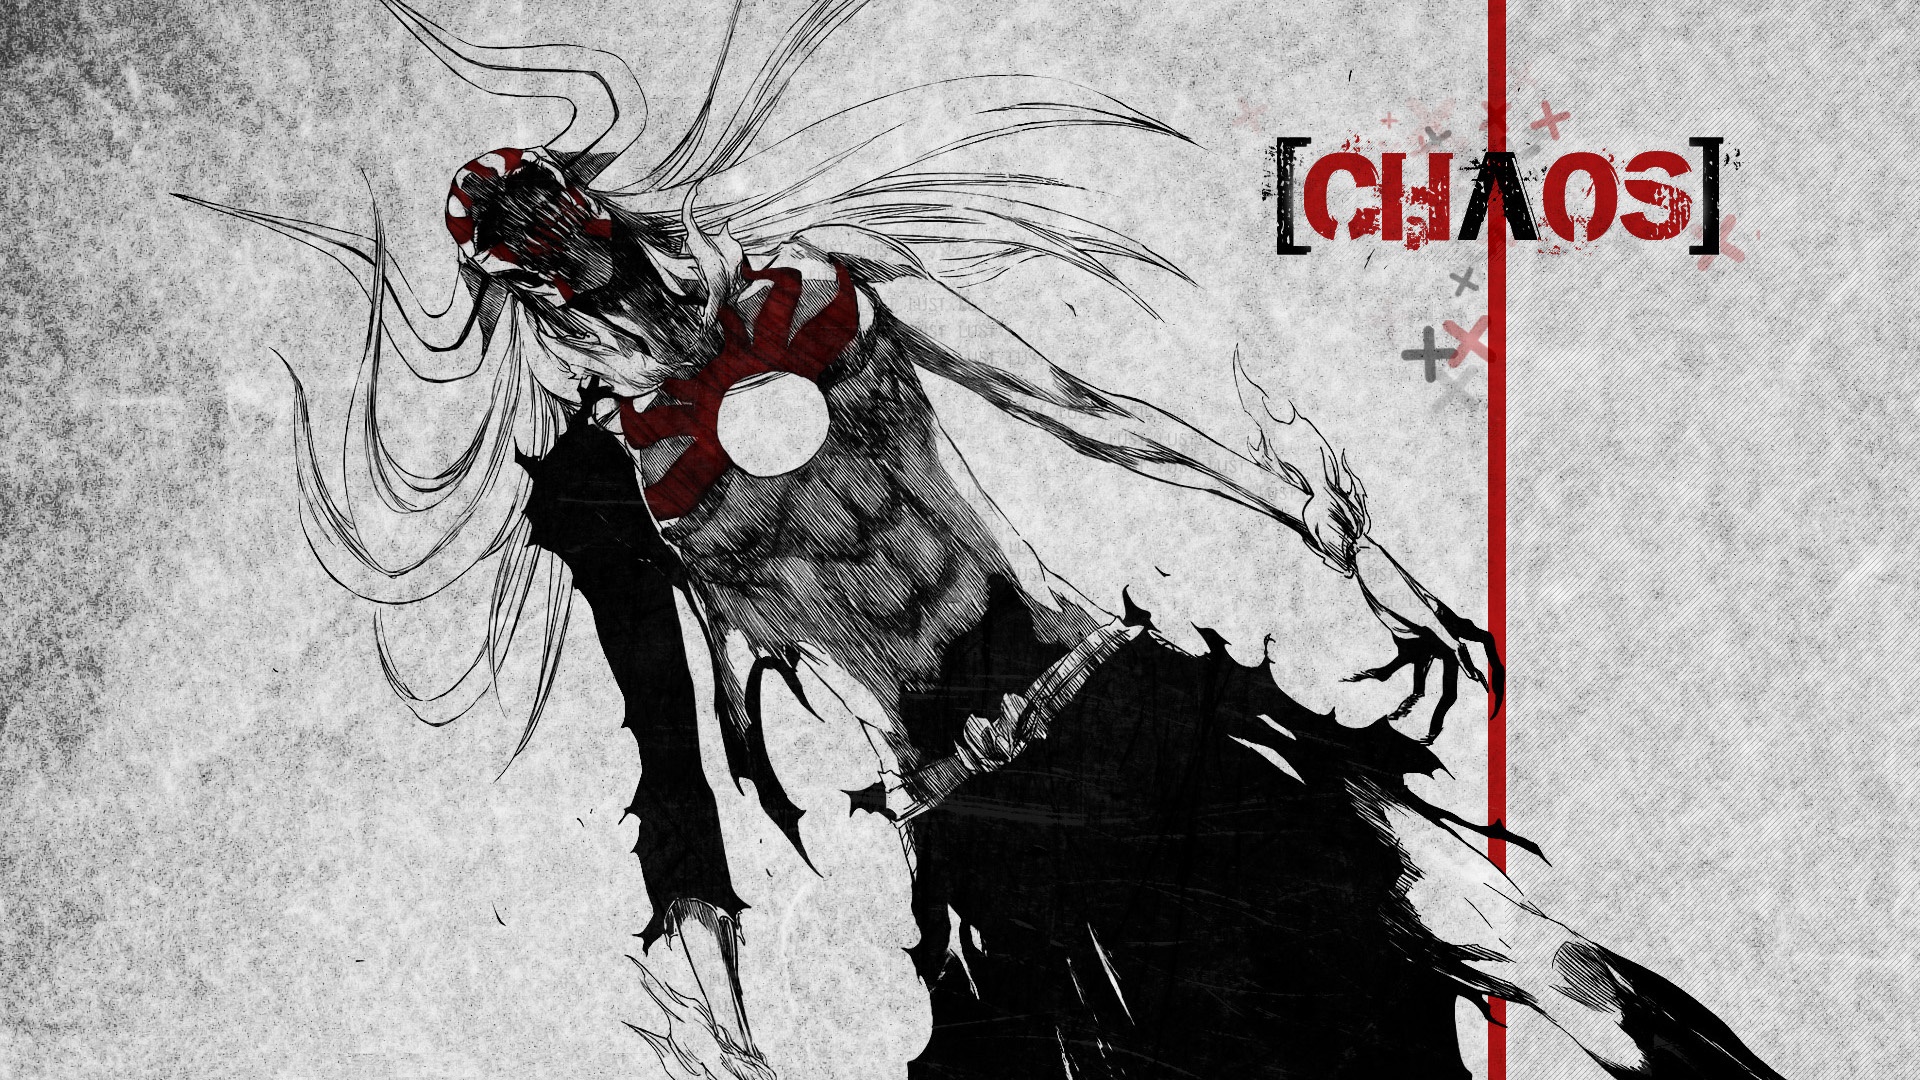 anime wallpaper hd free download,graphic design,illustration,fictional character,art,font